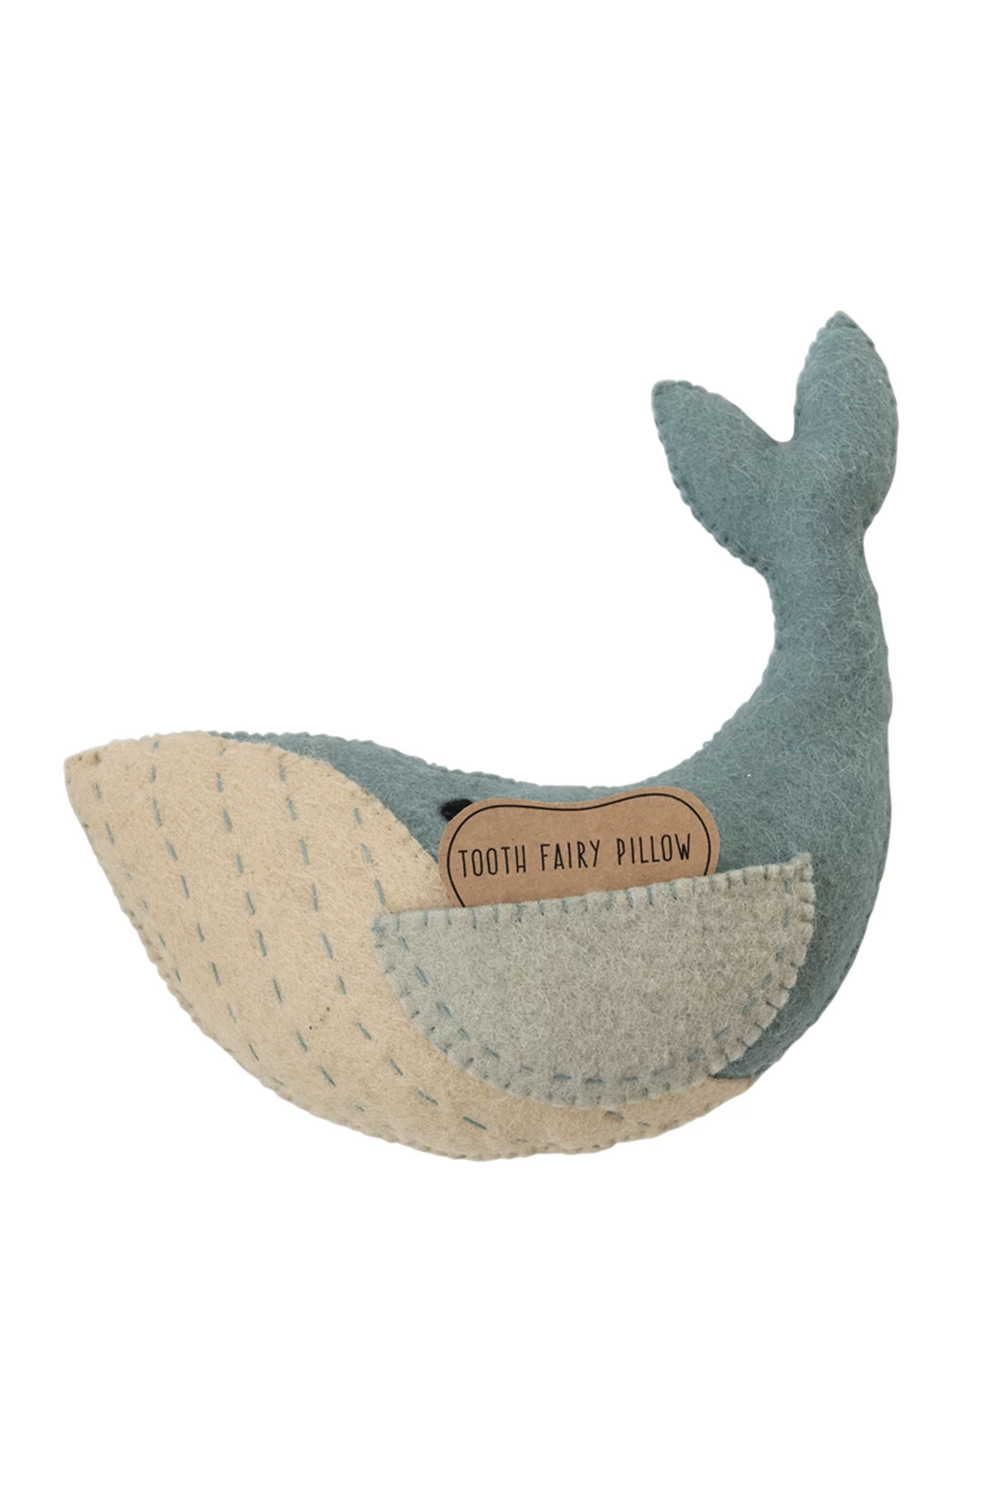 SIDEWALK SALE ITEM - Whale Tooth Fairy Pillow